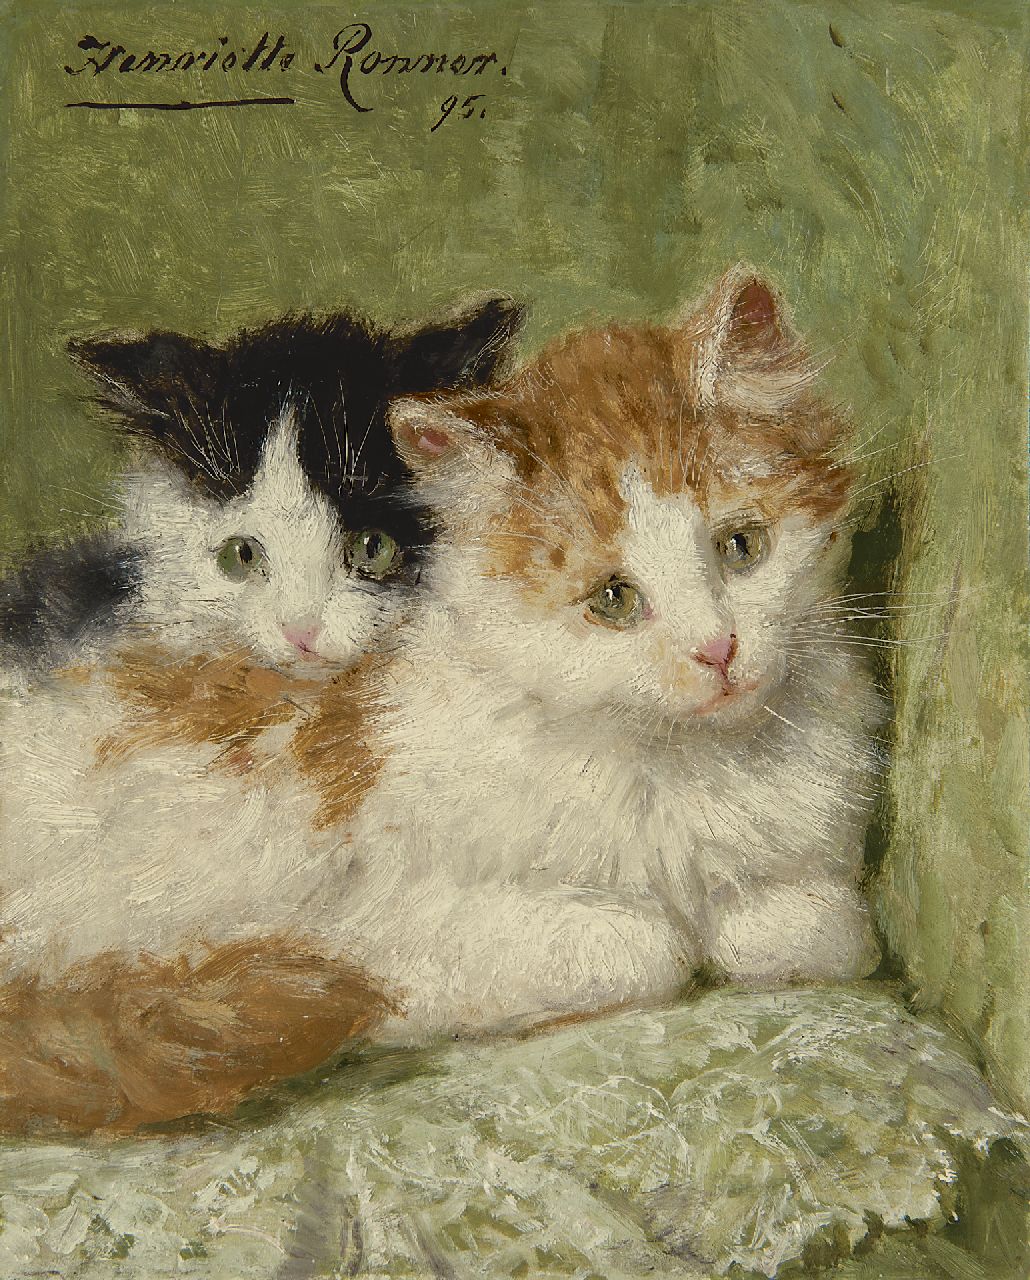 Ronner-Knip H.  | Henriette Ronner-Knip, Two kittens sitting on a cushion, Öl auf Holz 20,9 x 16,7 cm, signed u.l. und dated '95